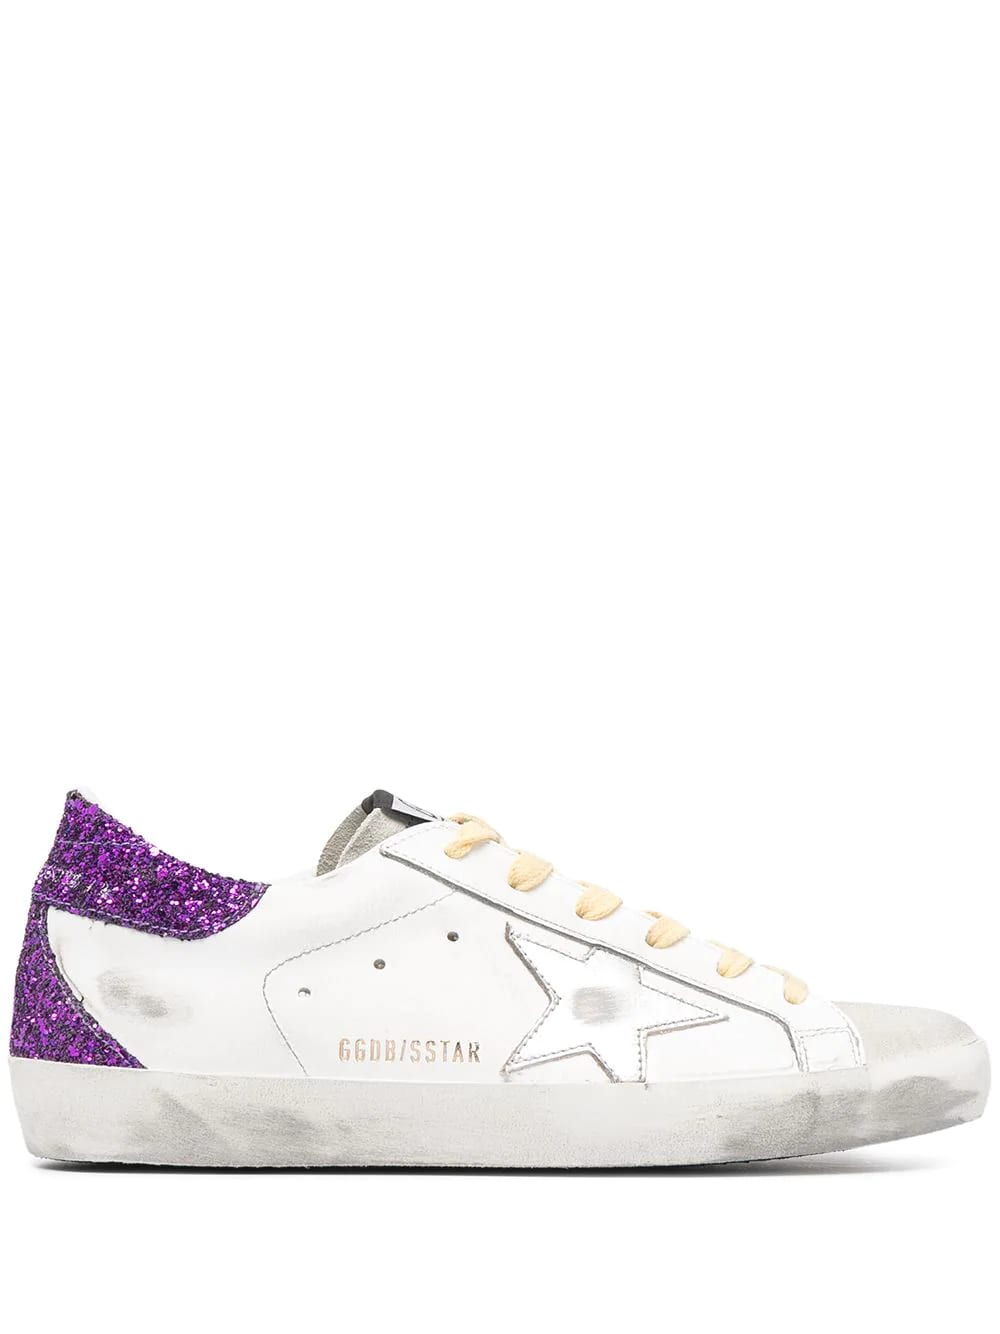 Photo of  Golden Goose Woman White Super-star Sneakers With Silver Star, Yellow Laces And Purple Glitter Spoiler- shop Golden Goose Sneakers online sales